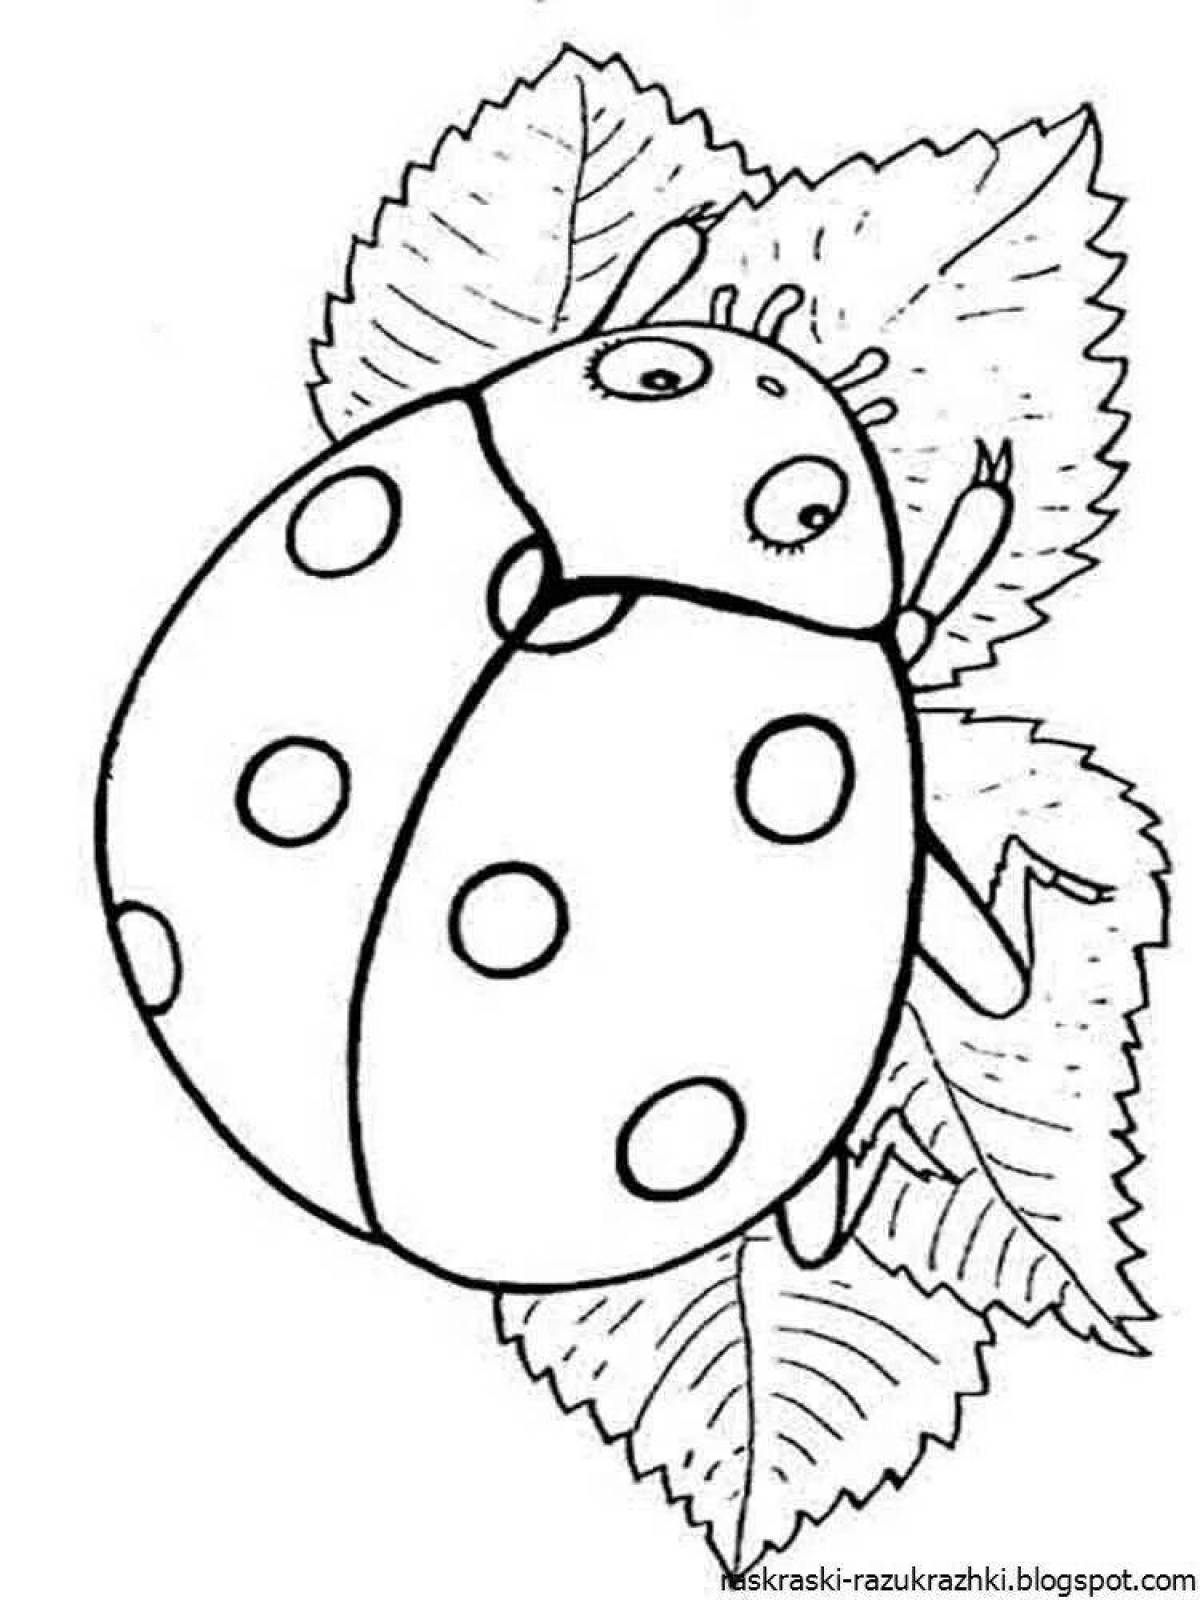 Colourful ladybug coloring page for kids